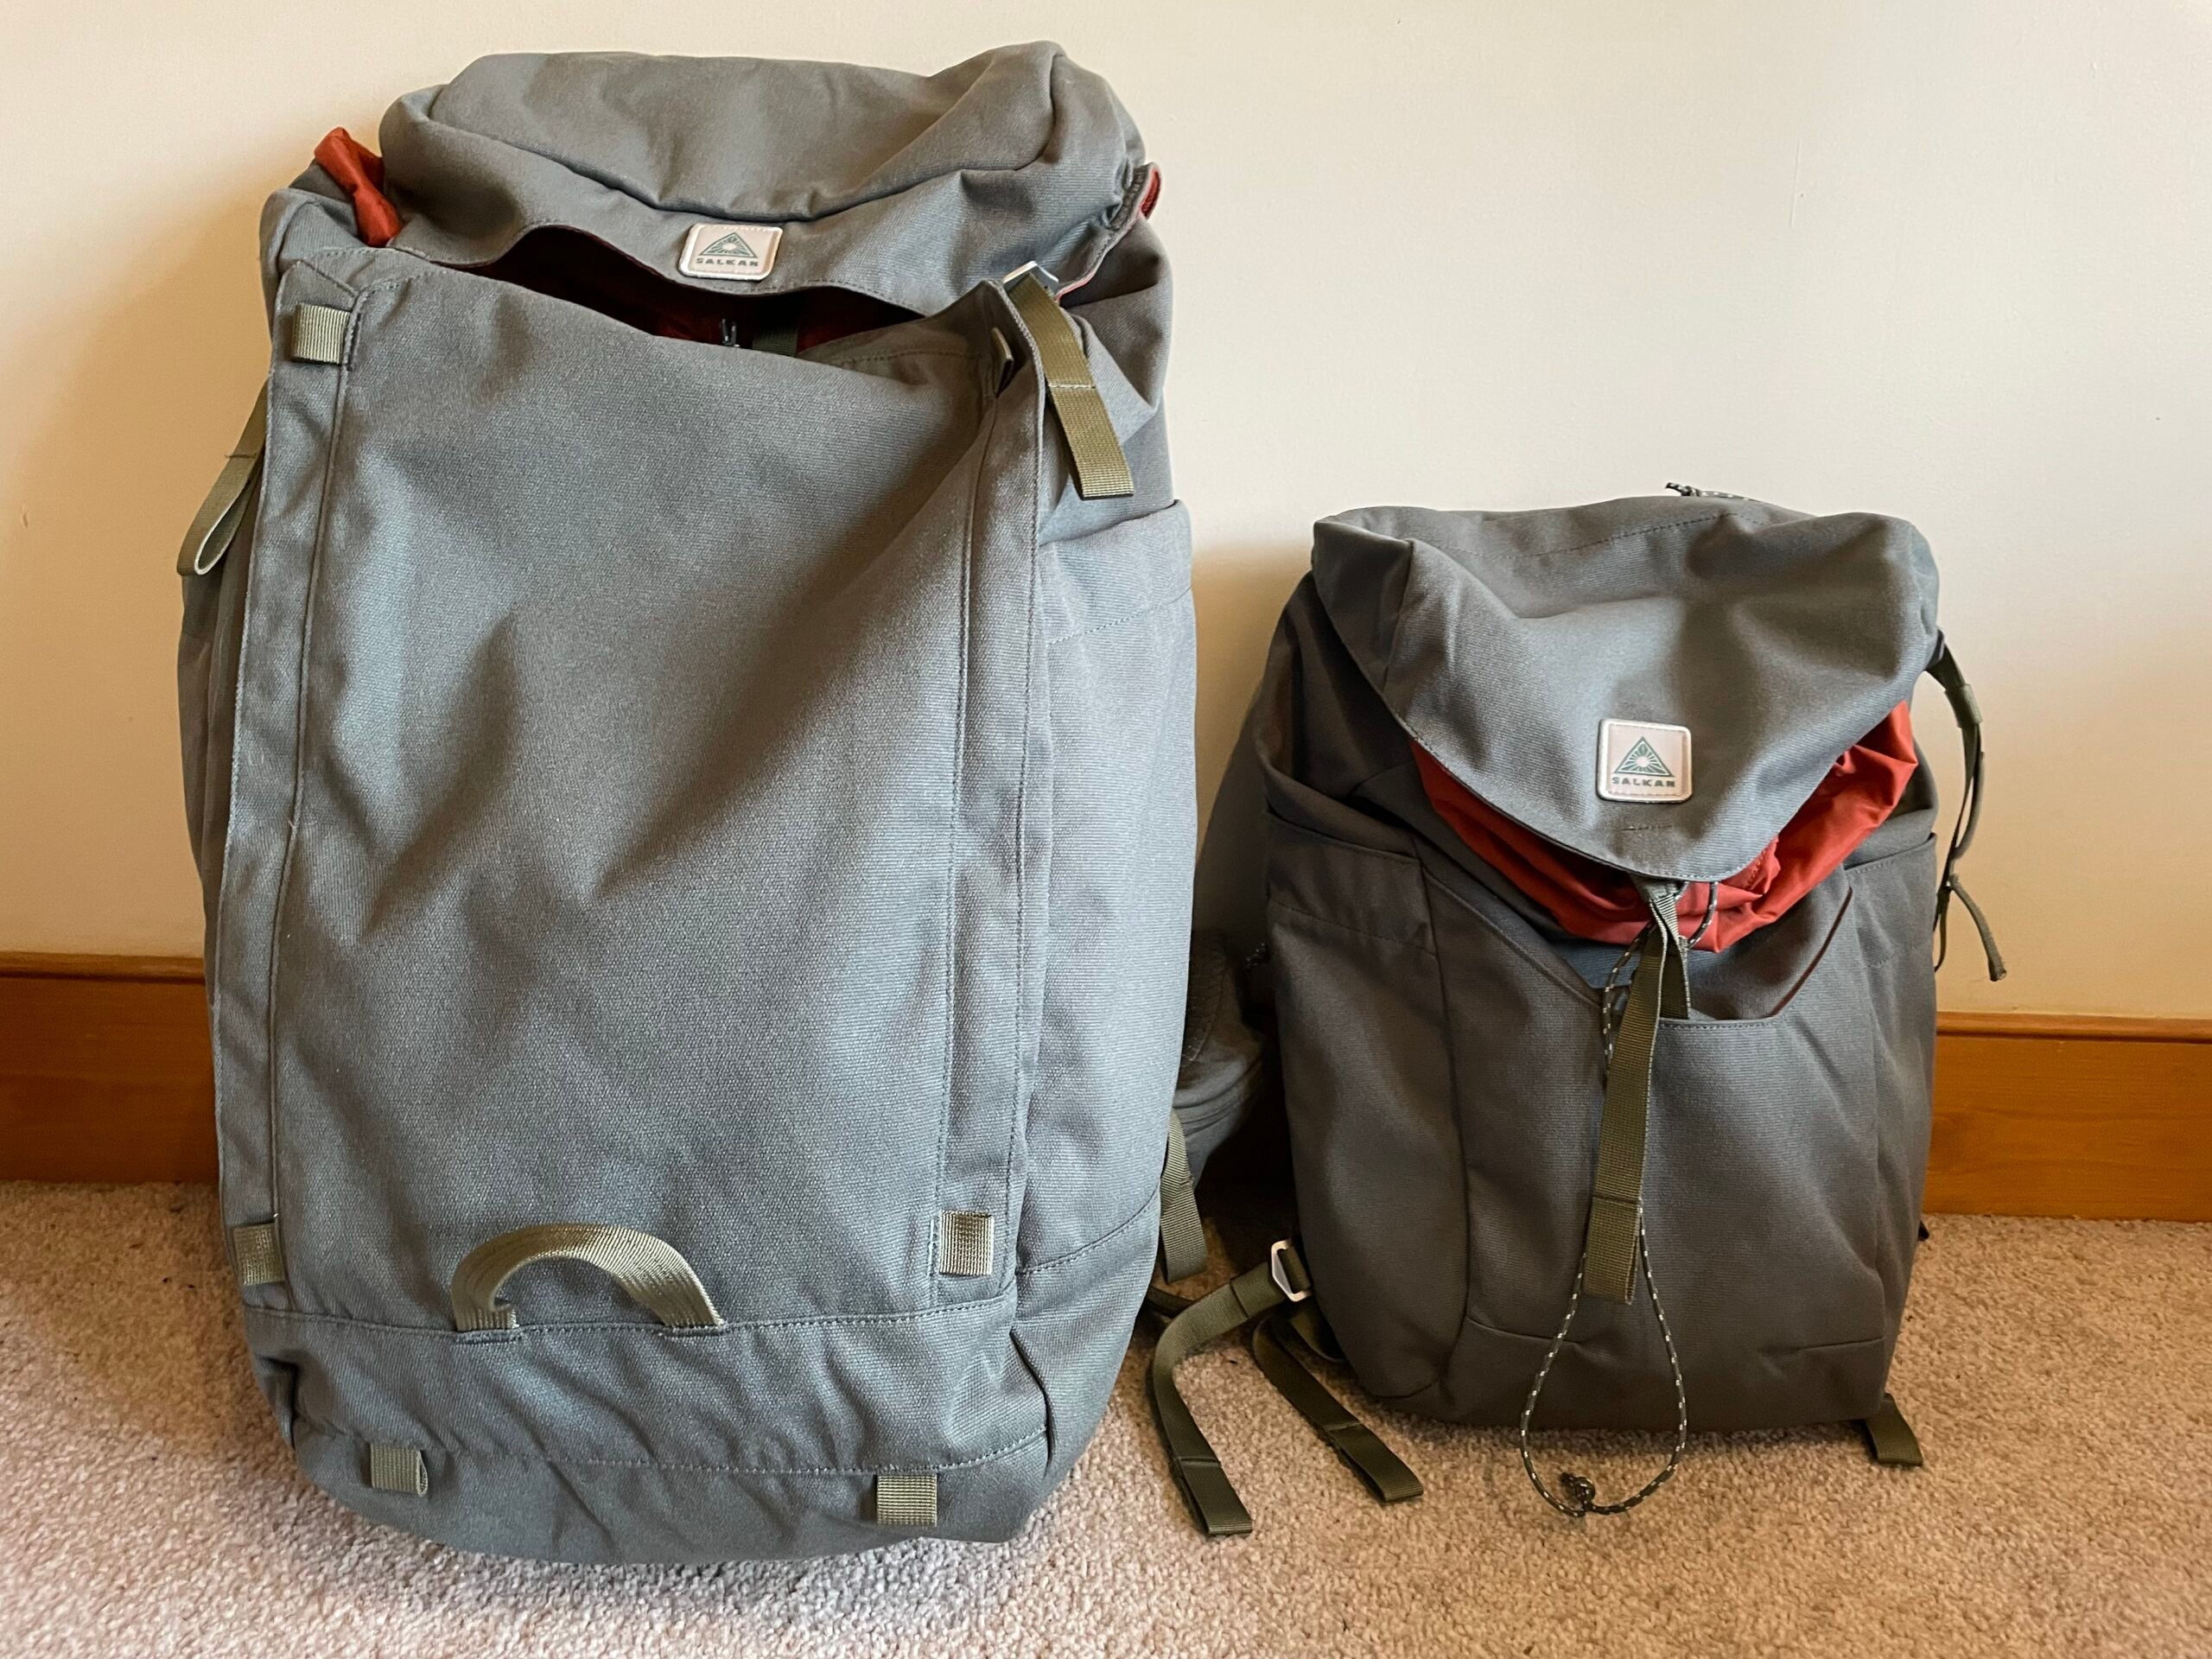 The Salkan Daypack and its big brother, the main pack.